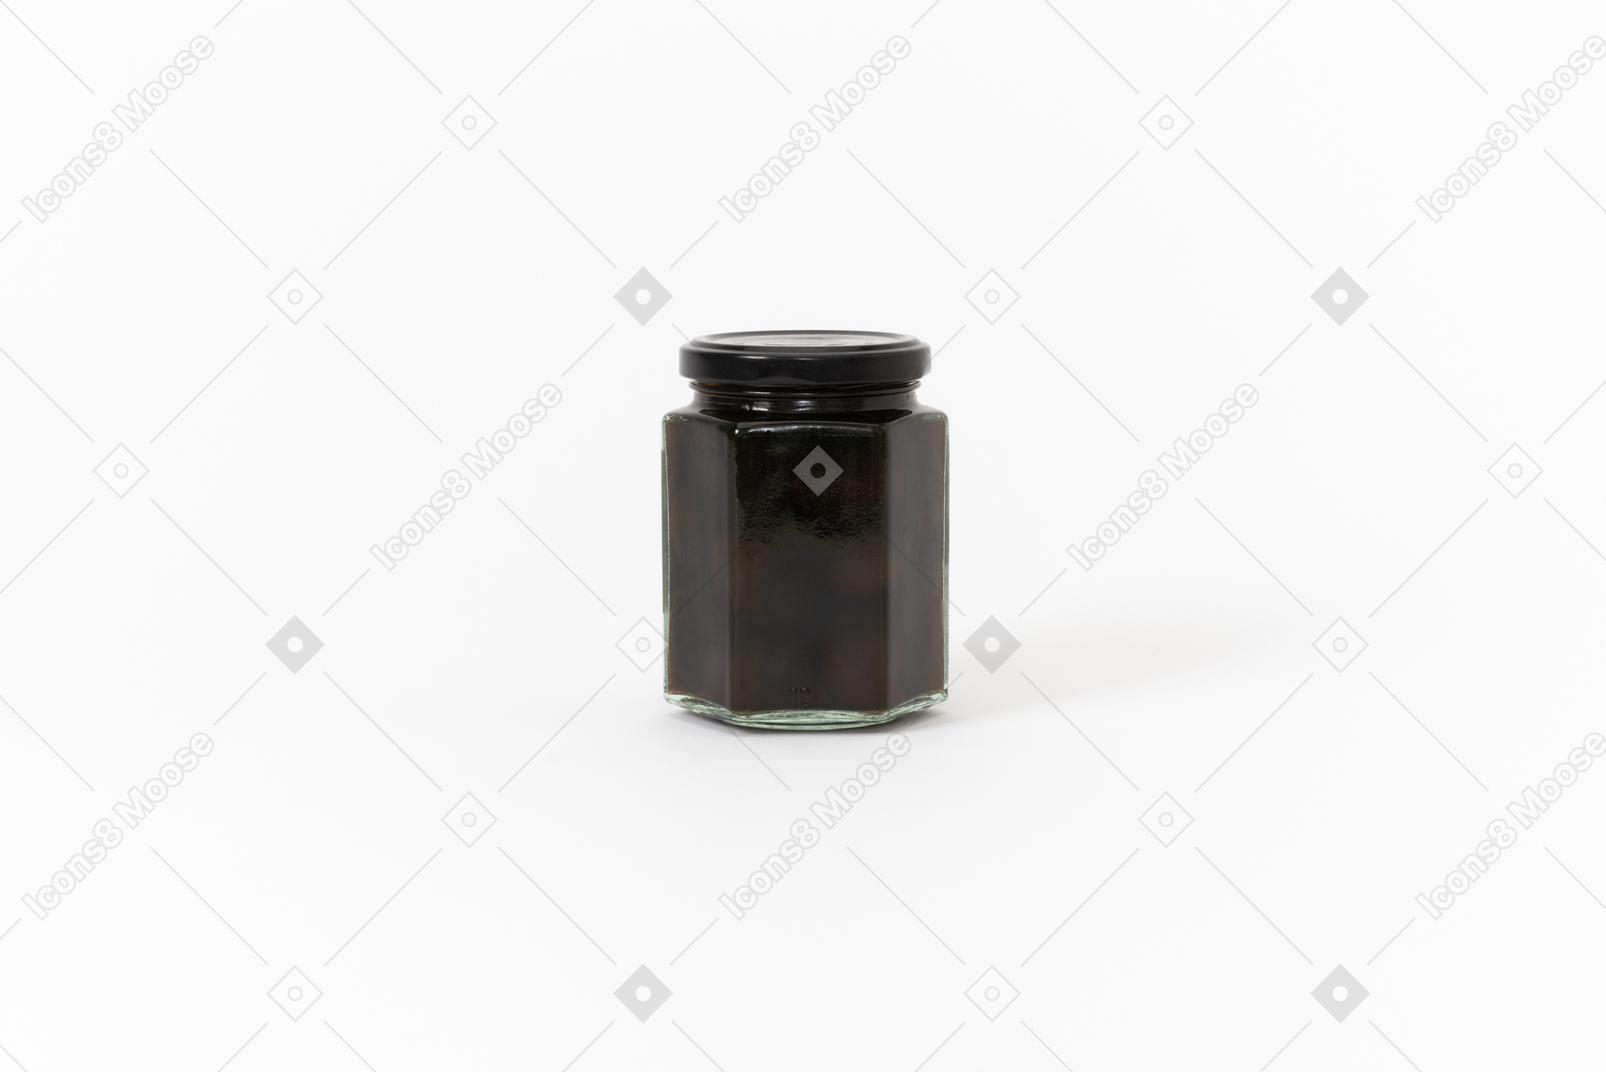 Canned black olives in a glass jar